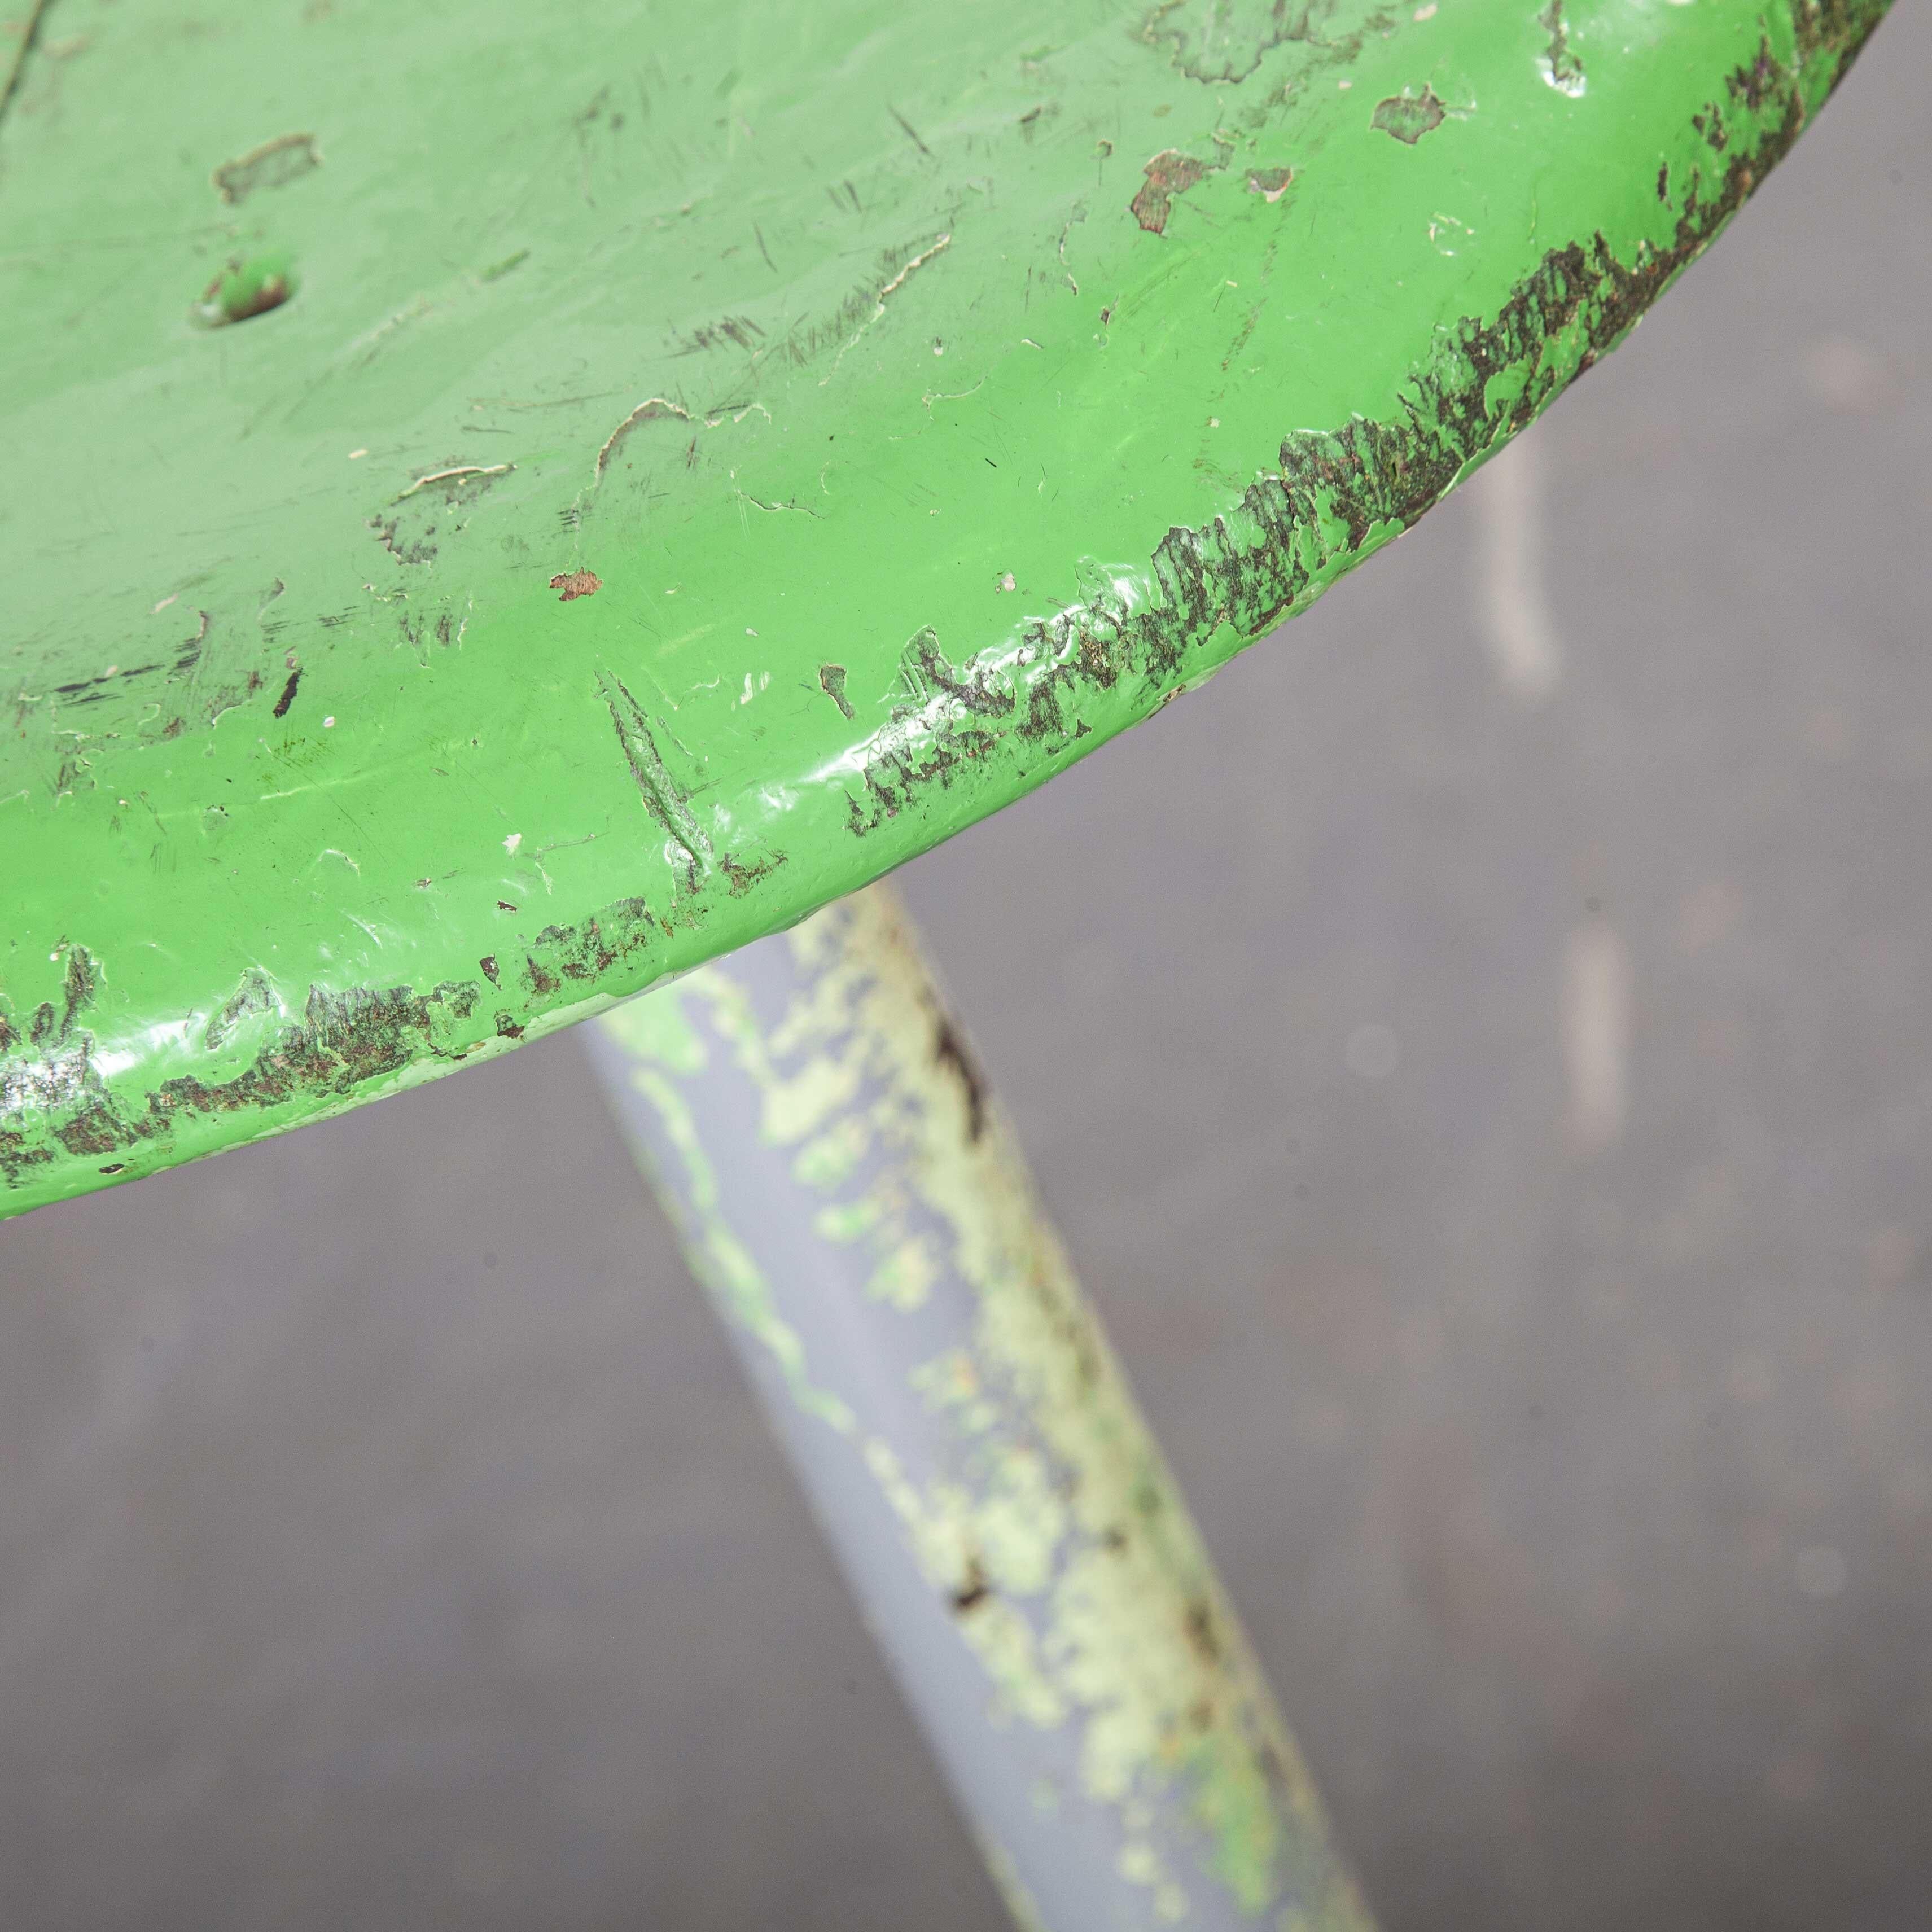 1960s vintage industrial stool
1960s simple vintage Russian industrial stool. Fixed seat not swivelling. We service and wax our chairs/stools individually before they leave our workshop and we deliver products of excellent quality. 34cm diameter